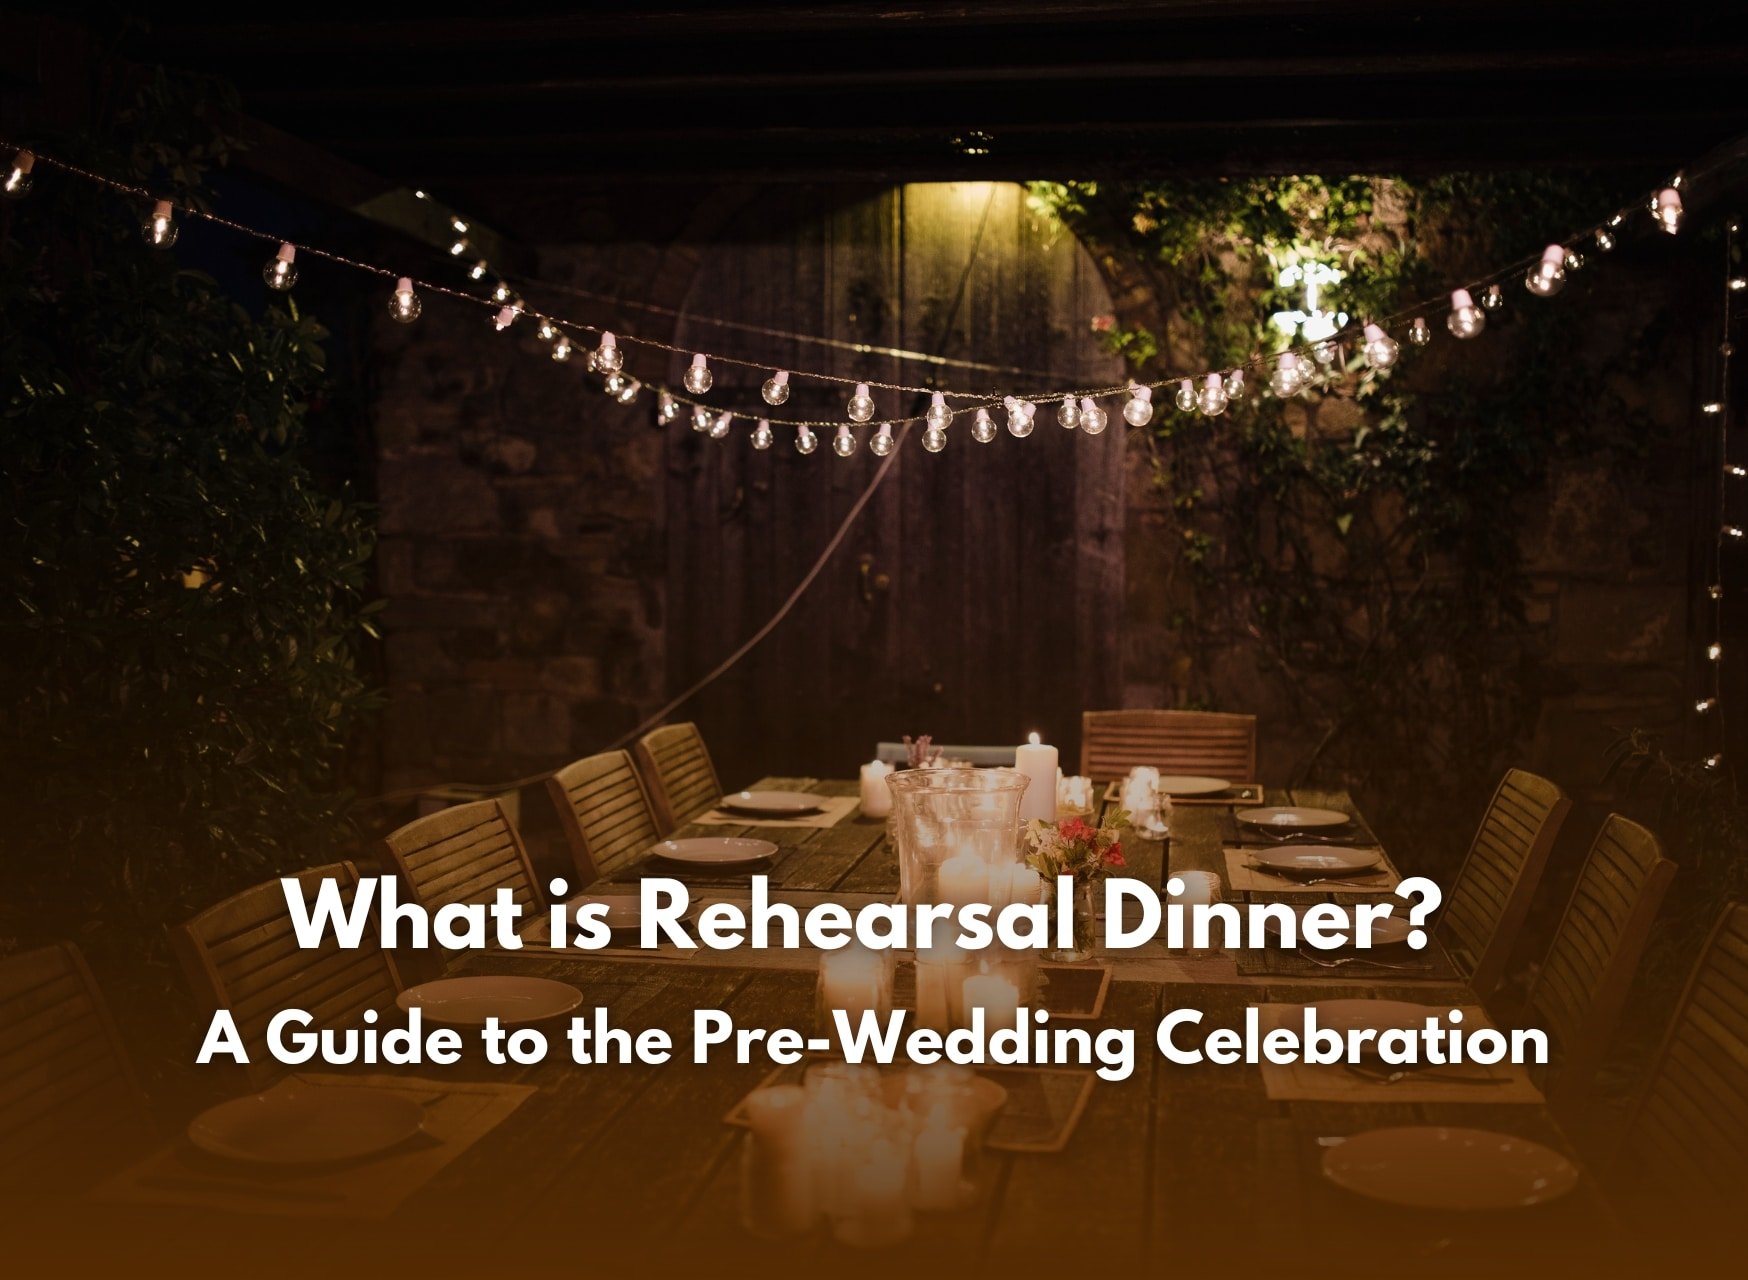 What Is A Maid Of Honor 2 - What Is Rehearsal Dinner | Cubebik Blog